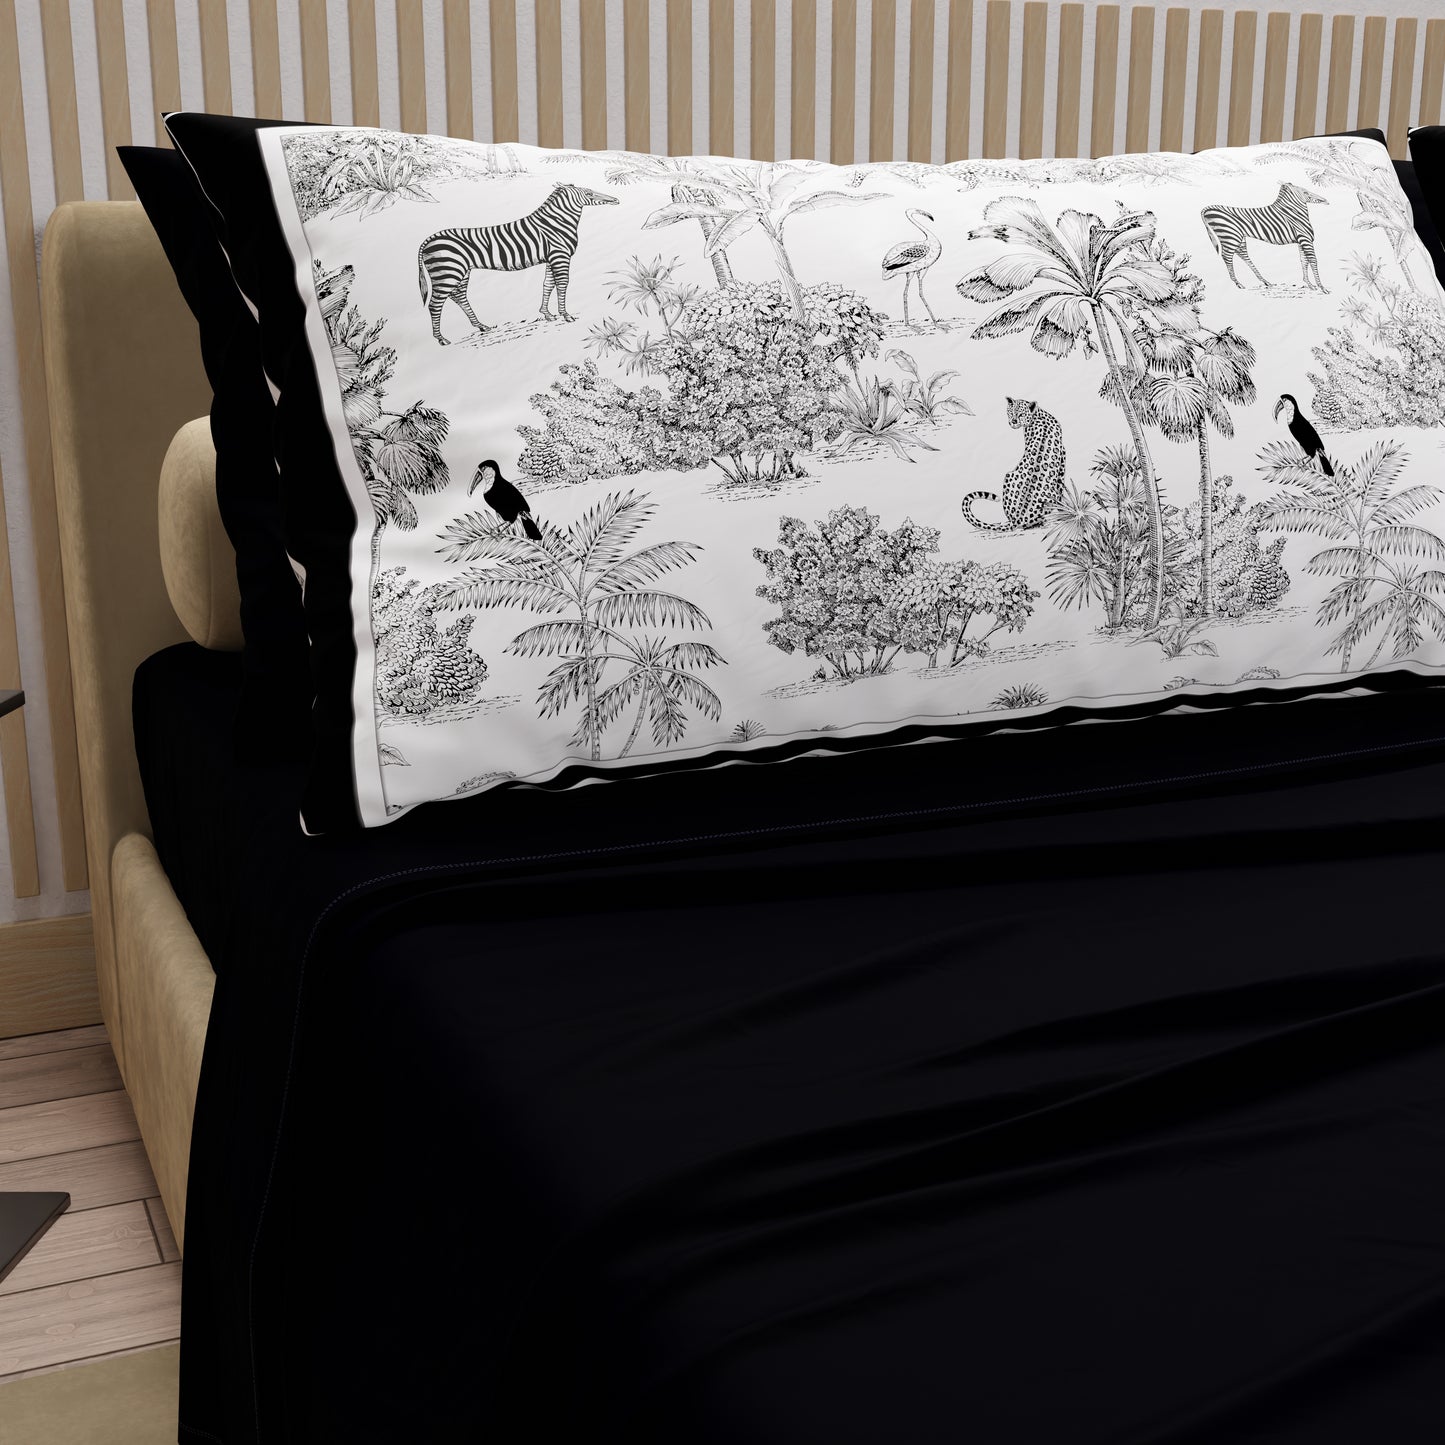 Cotton sheets, bed set with black animalier digital print pillowcases